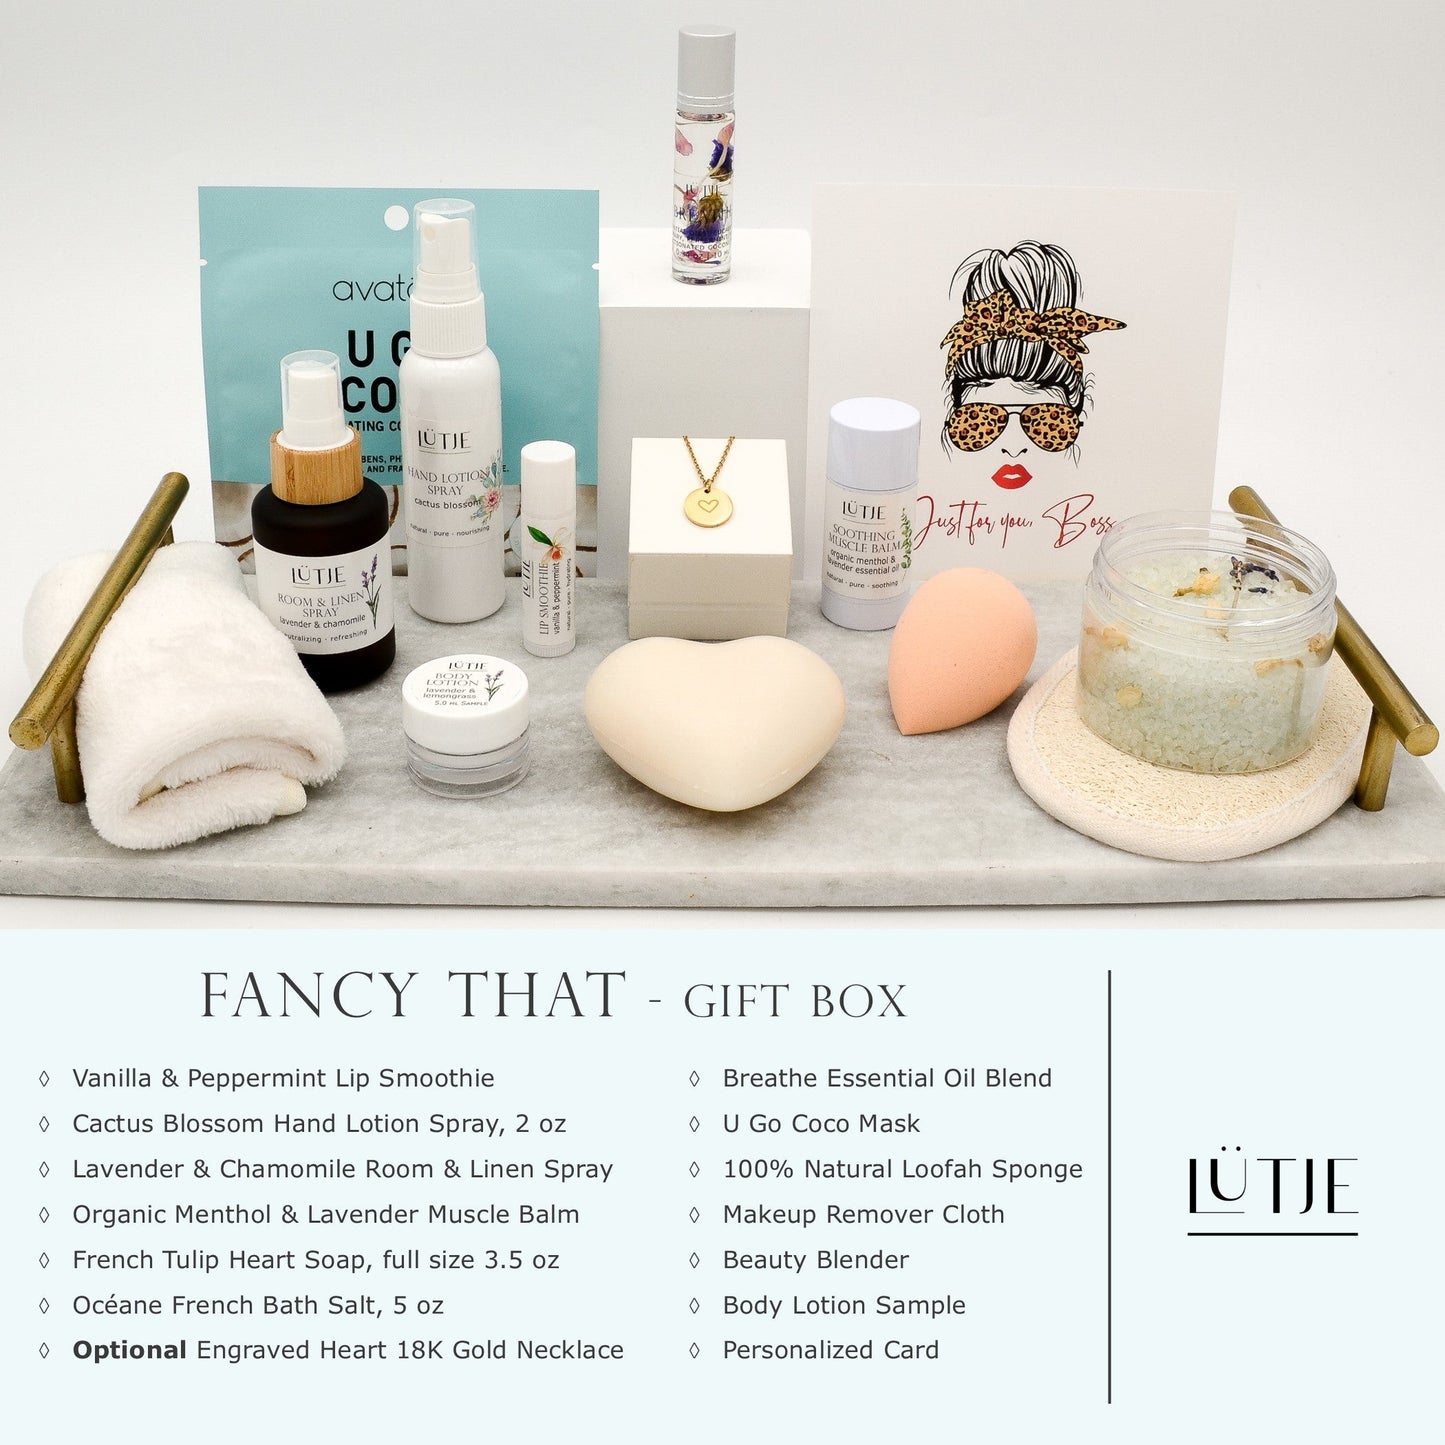 Fancy That Gift Box for women, BFF, wife, daughter, sister, mom, or grandma, includes Cactus Blossom hand lotion spray, essential oil, lip balm, soothing muscle balm, Lavender & Chamomile room & linen spray, French soap, French bath salts, hydrating face mask, other bath, spa and self-care items, and 18K gold-plated necklace with engraved heart.